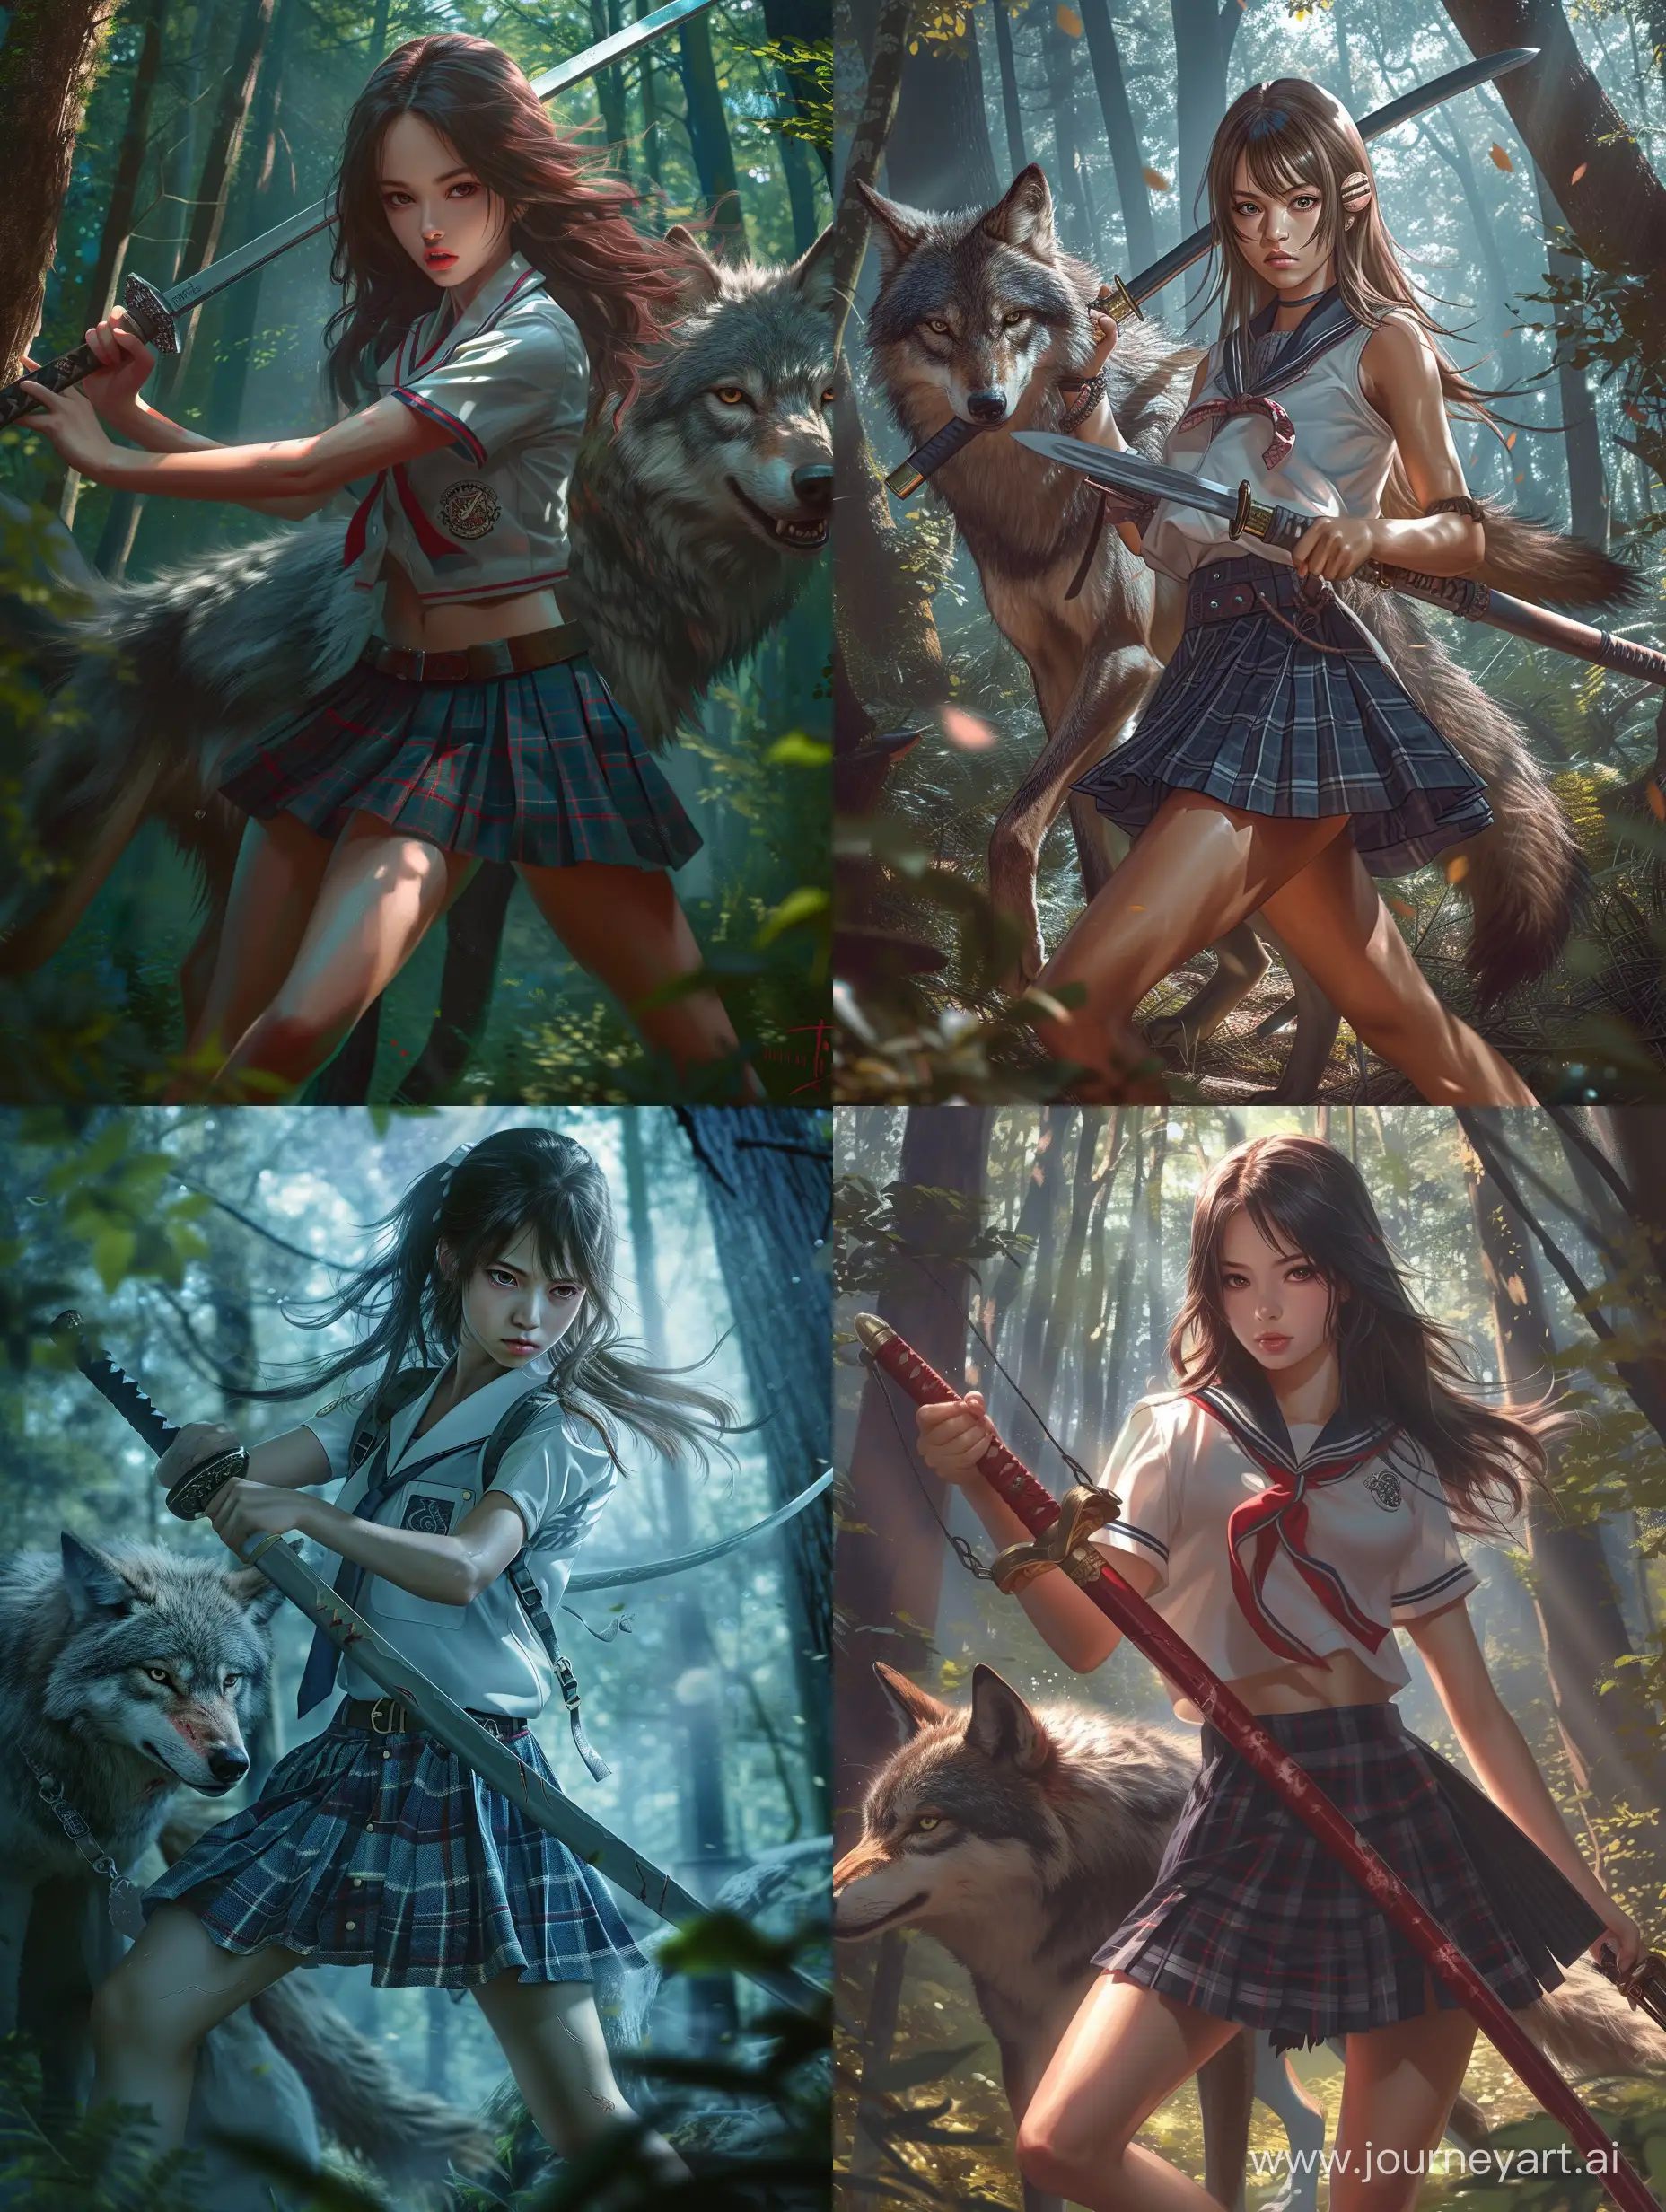 High-School-Girl-with-Sword-and-Wolf-in-Enchanted-Forest